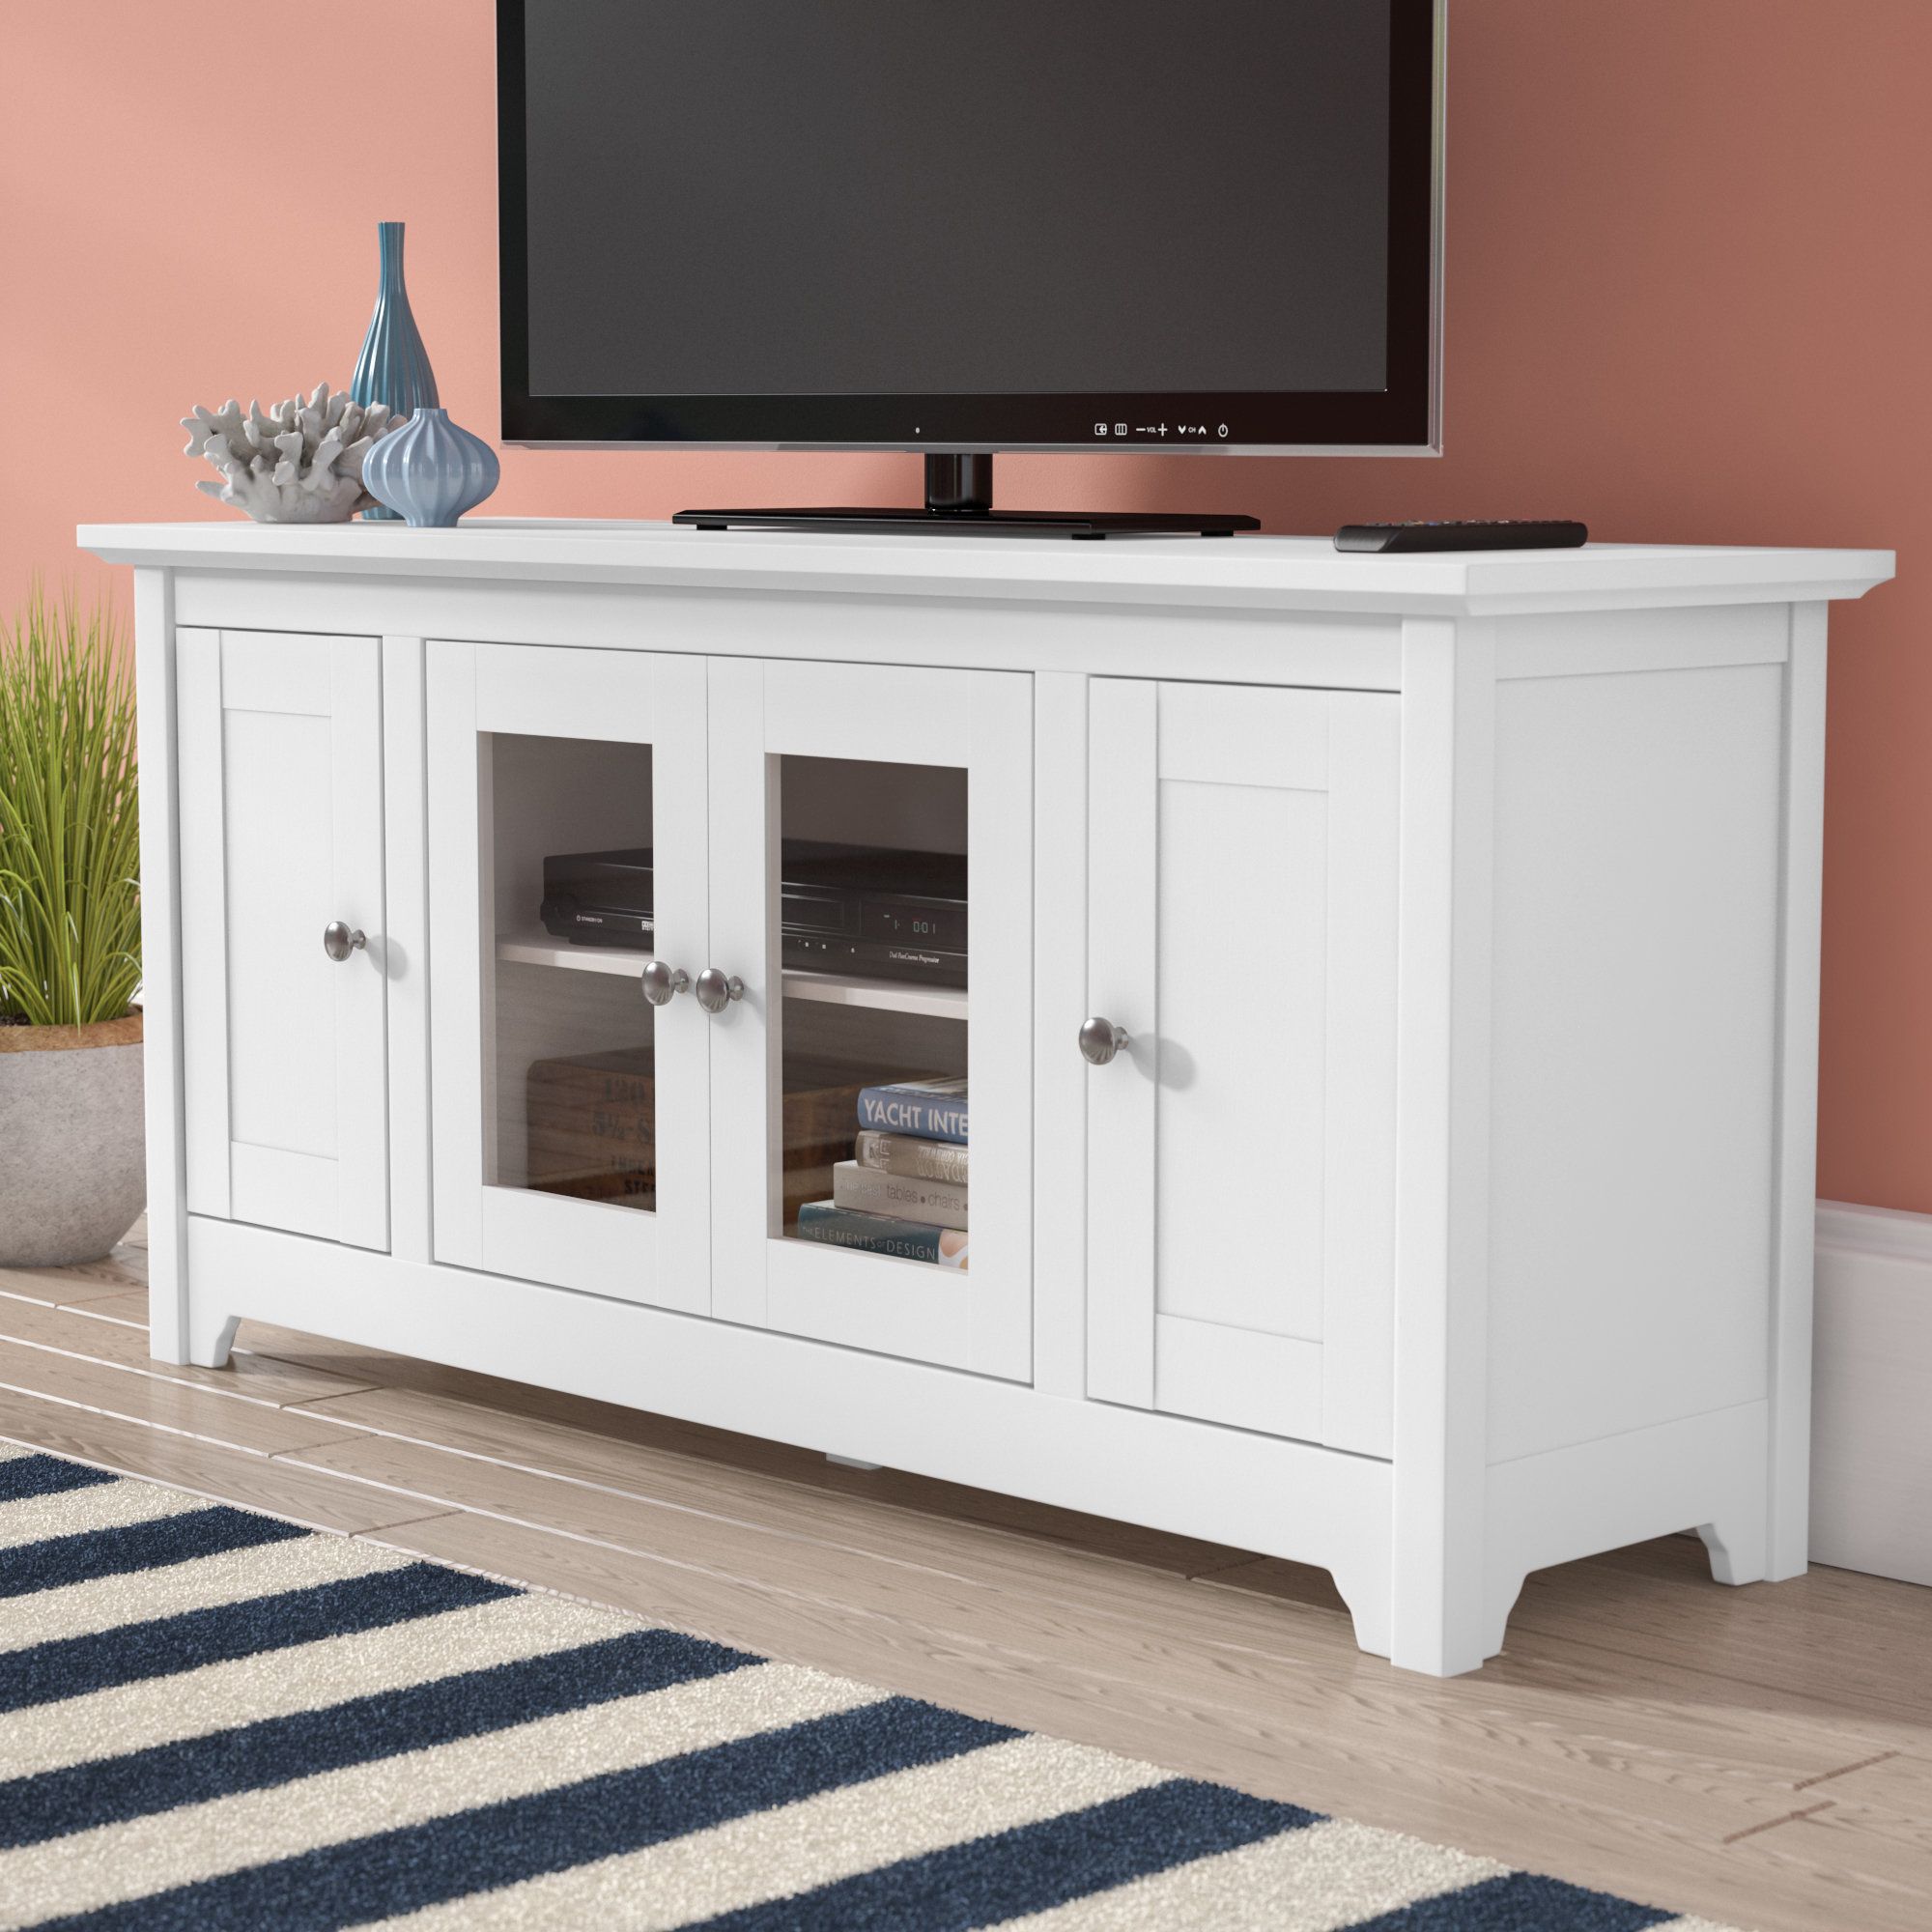 Tv Stands Sale You'll Love | Wayfair In Laurent 50 Inch Tv Stands (View 30 of 30)